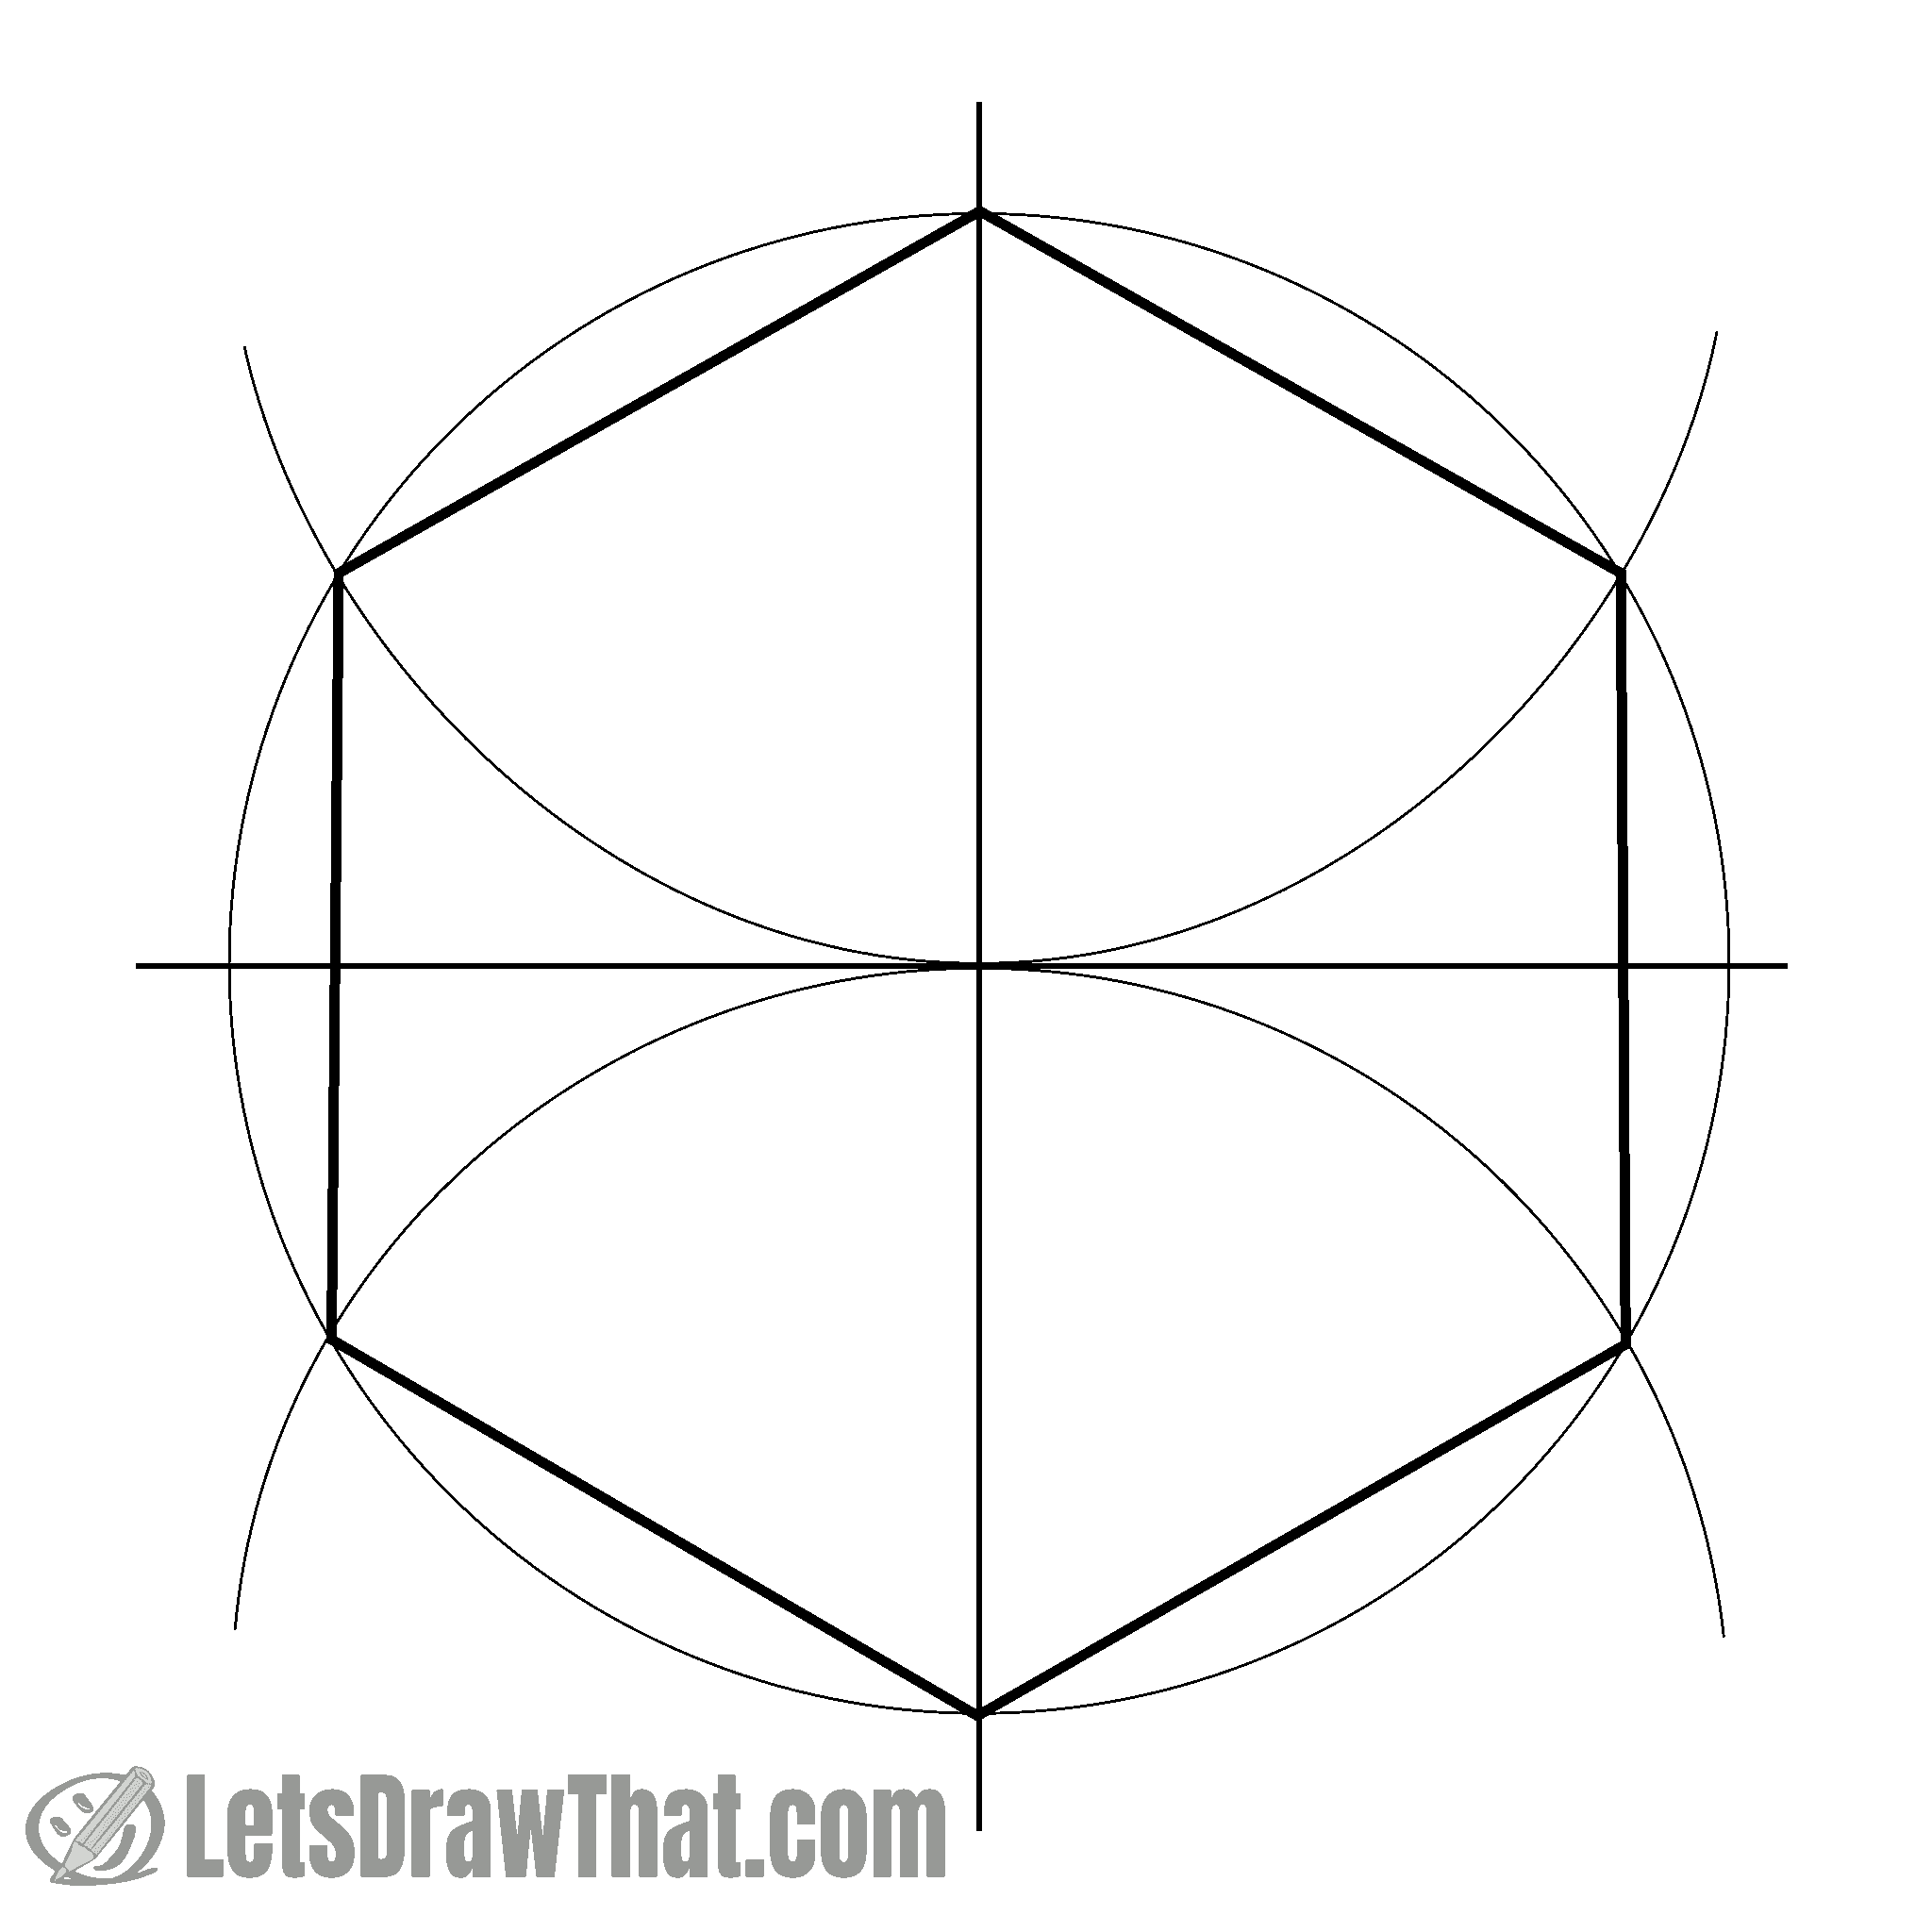 How to draw a hexagon with a compass: completed perfect hexagon